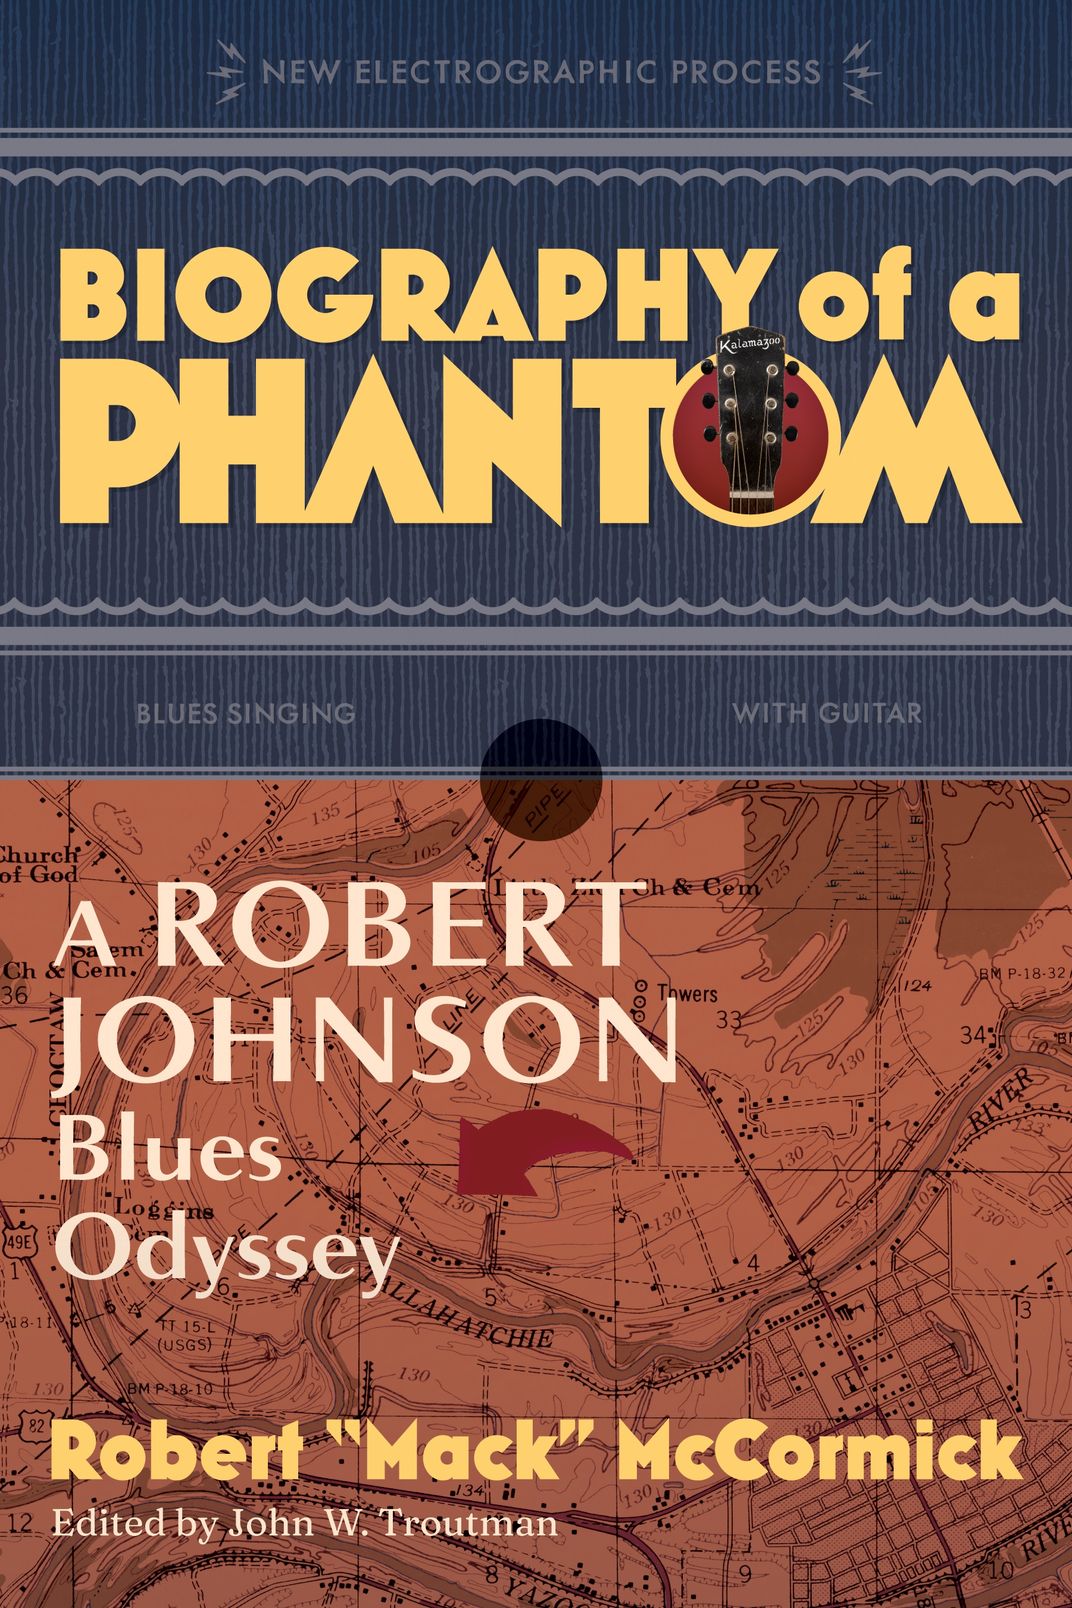 Biography of a Phantom book cover visually resembles a record and uses one of Mack McCormick's research maps.